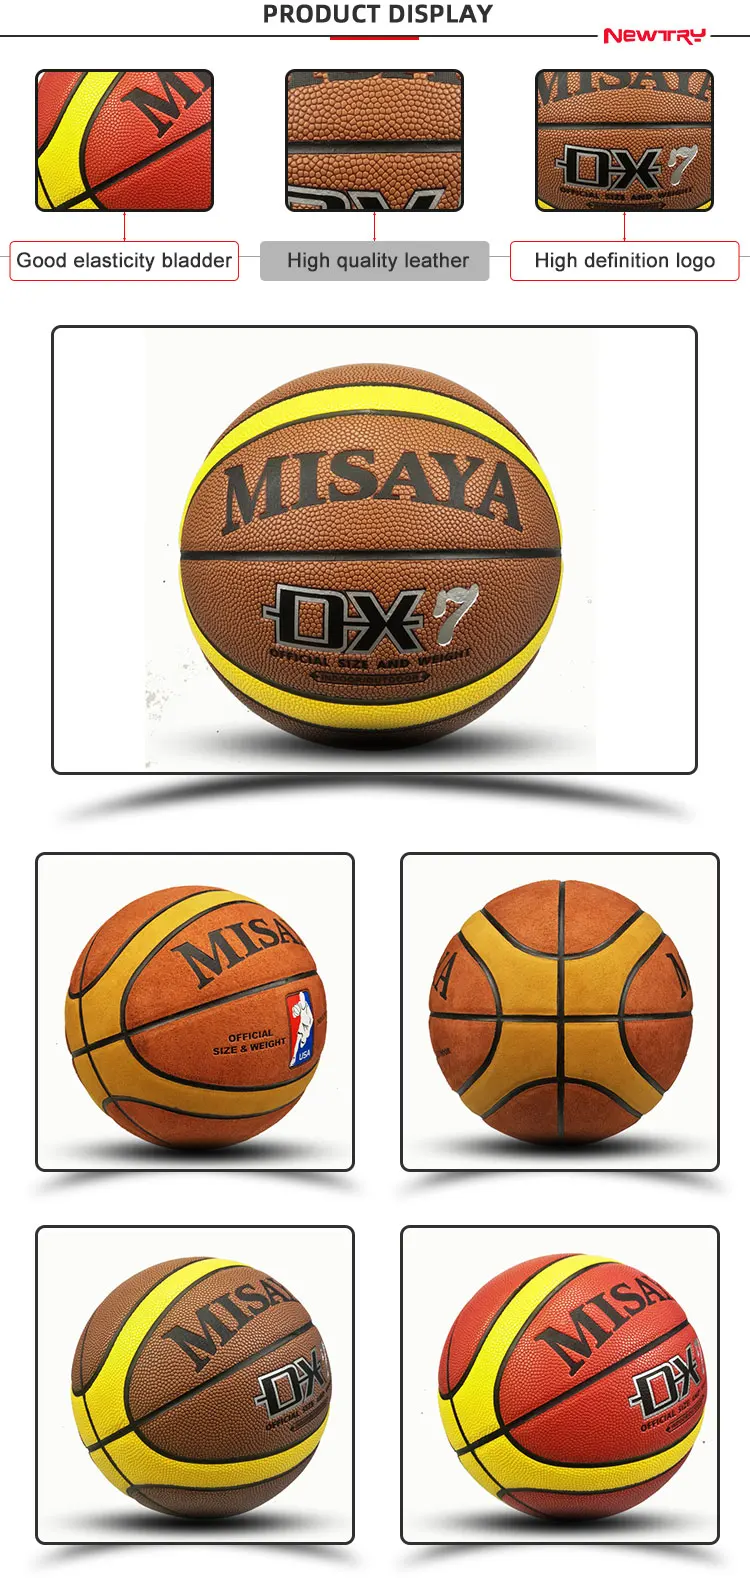 Molten Official Size 7 Indoor Outdoor 29.5'' GZ7X Composite Leather Basketball 